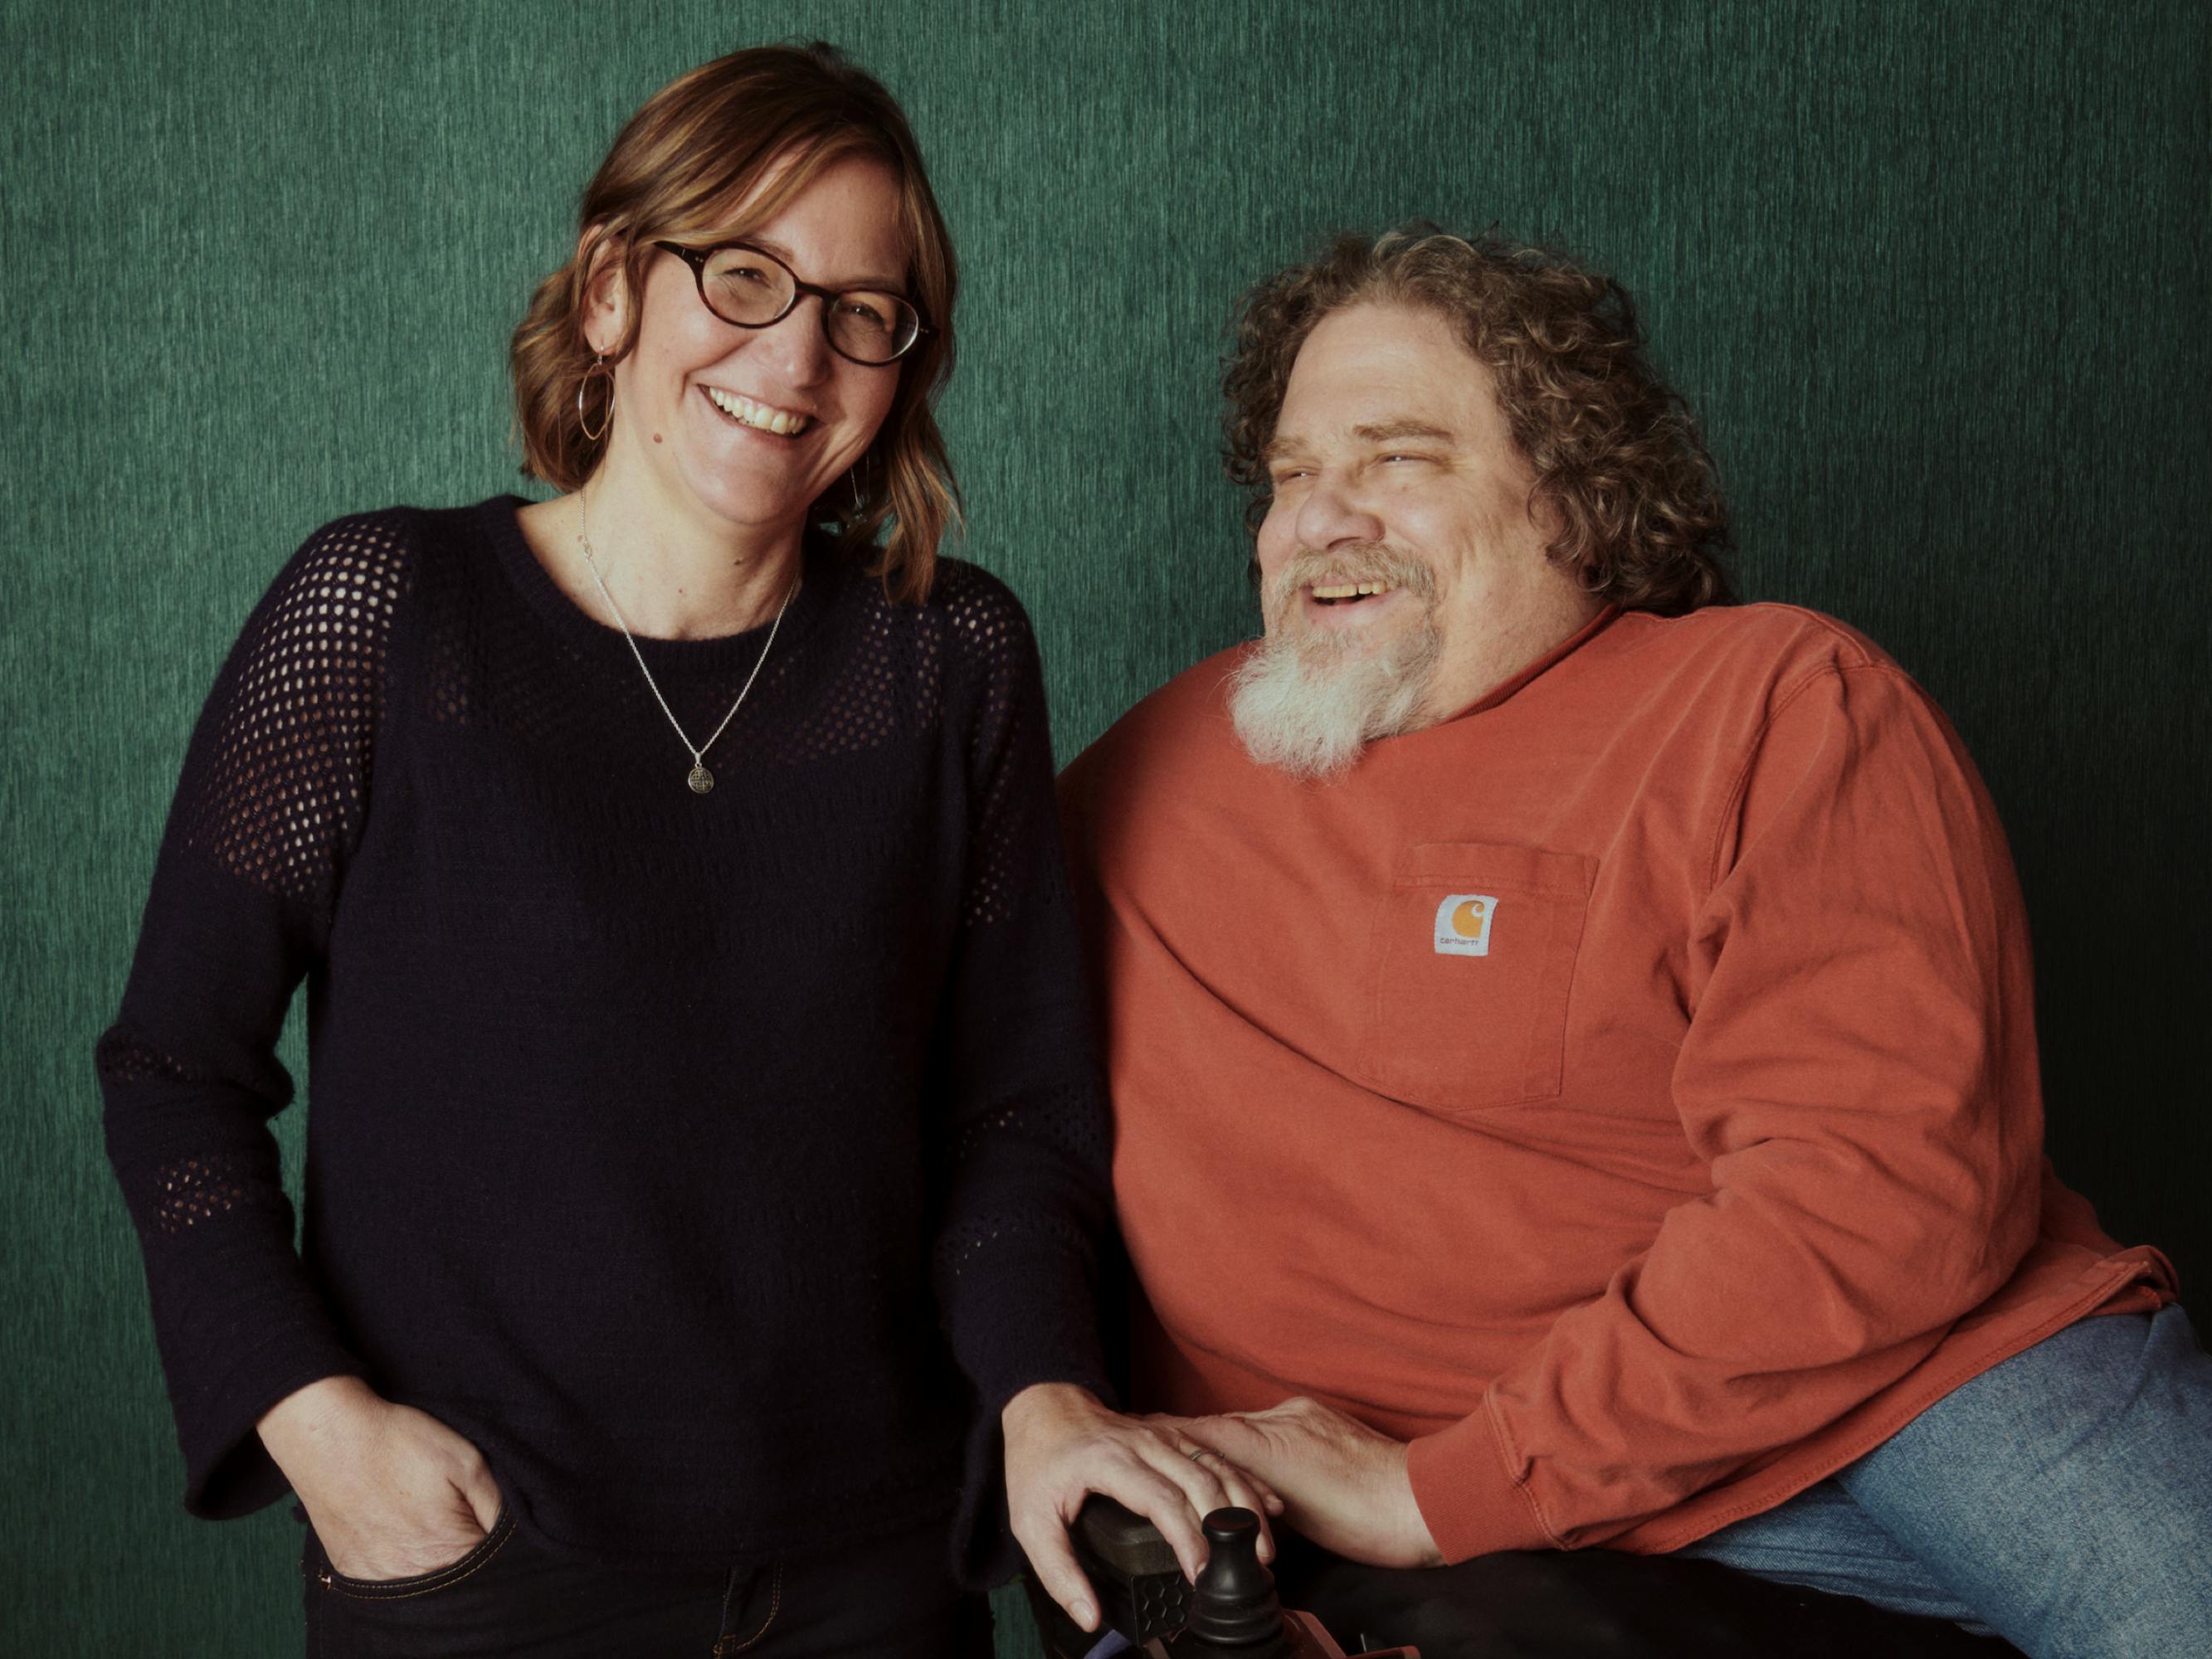 Crip Camp co-directors Nicole Newnham and Jim LeBrecht pose, laughing, in front of a green backdrop.